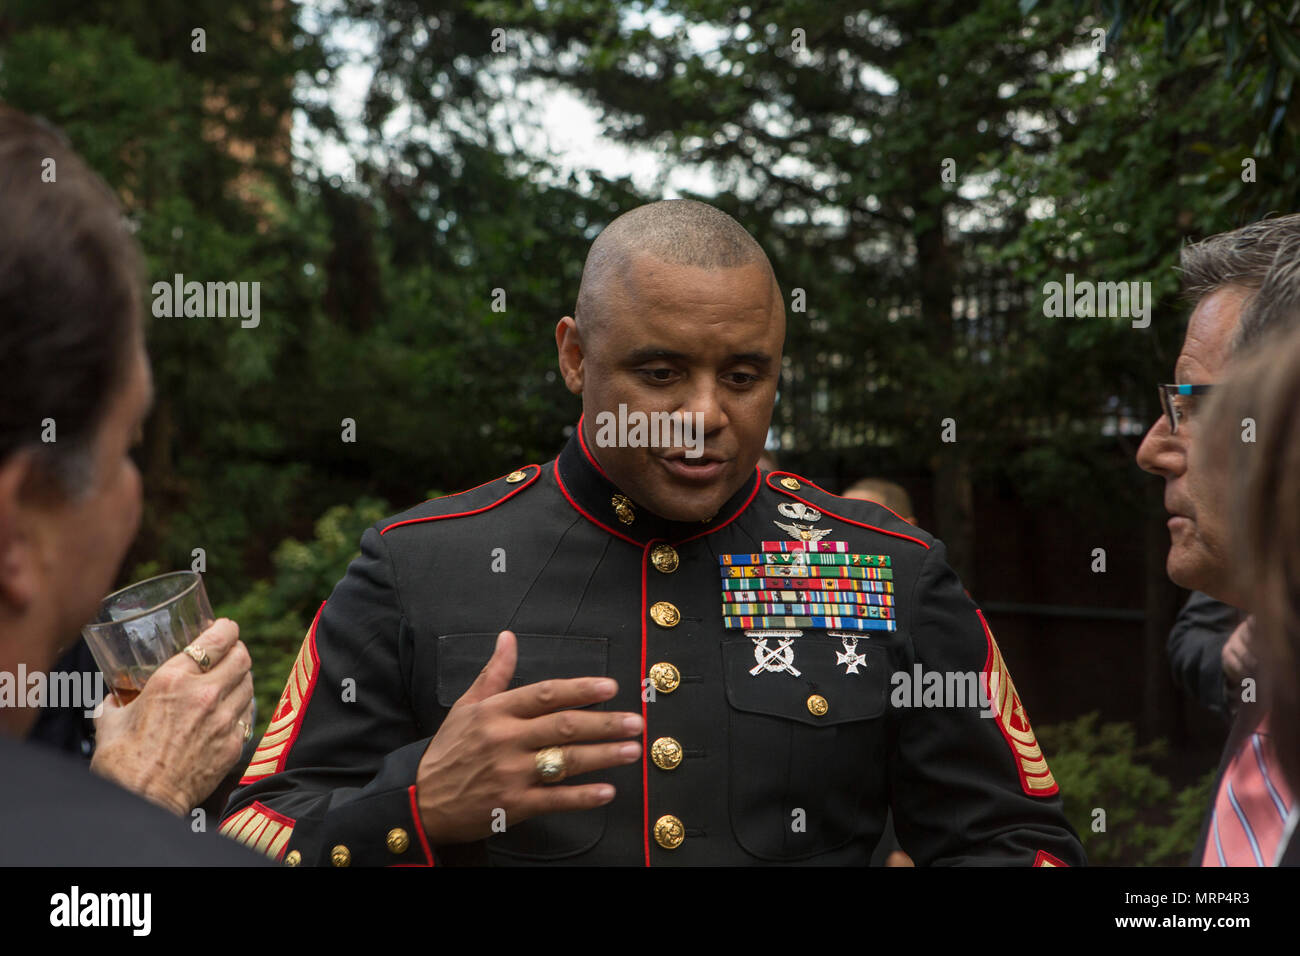 U.S. Marine Corps Sgt. Maj. Edward D. Parsons, sergeant major of Headquarters and Service Battalion, speaks with guests during a reception before an evening parade at Marine Barracks Washington, Washington D.C. June 23, 2017. Evening parades are held as a means of honoring senior officials distinguished citizens and supporters of the Marine Corps. (U.S. Marine Corps photo by Lance Cpl. Stephon L. McRae) Stock Photo